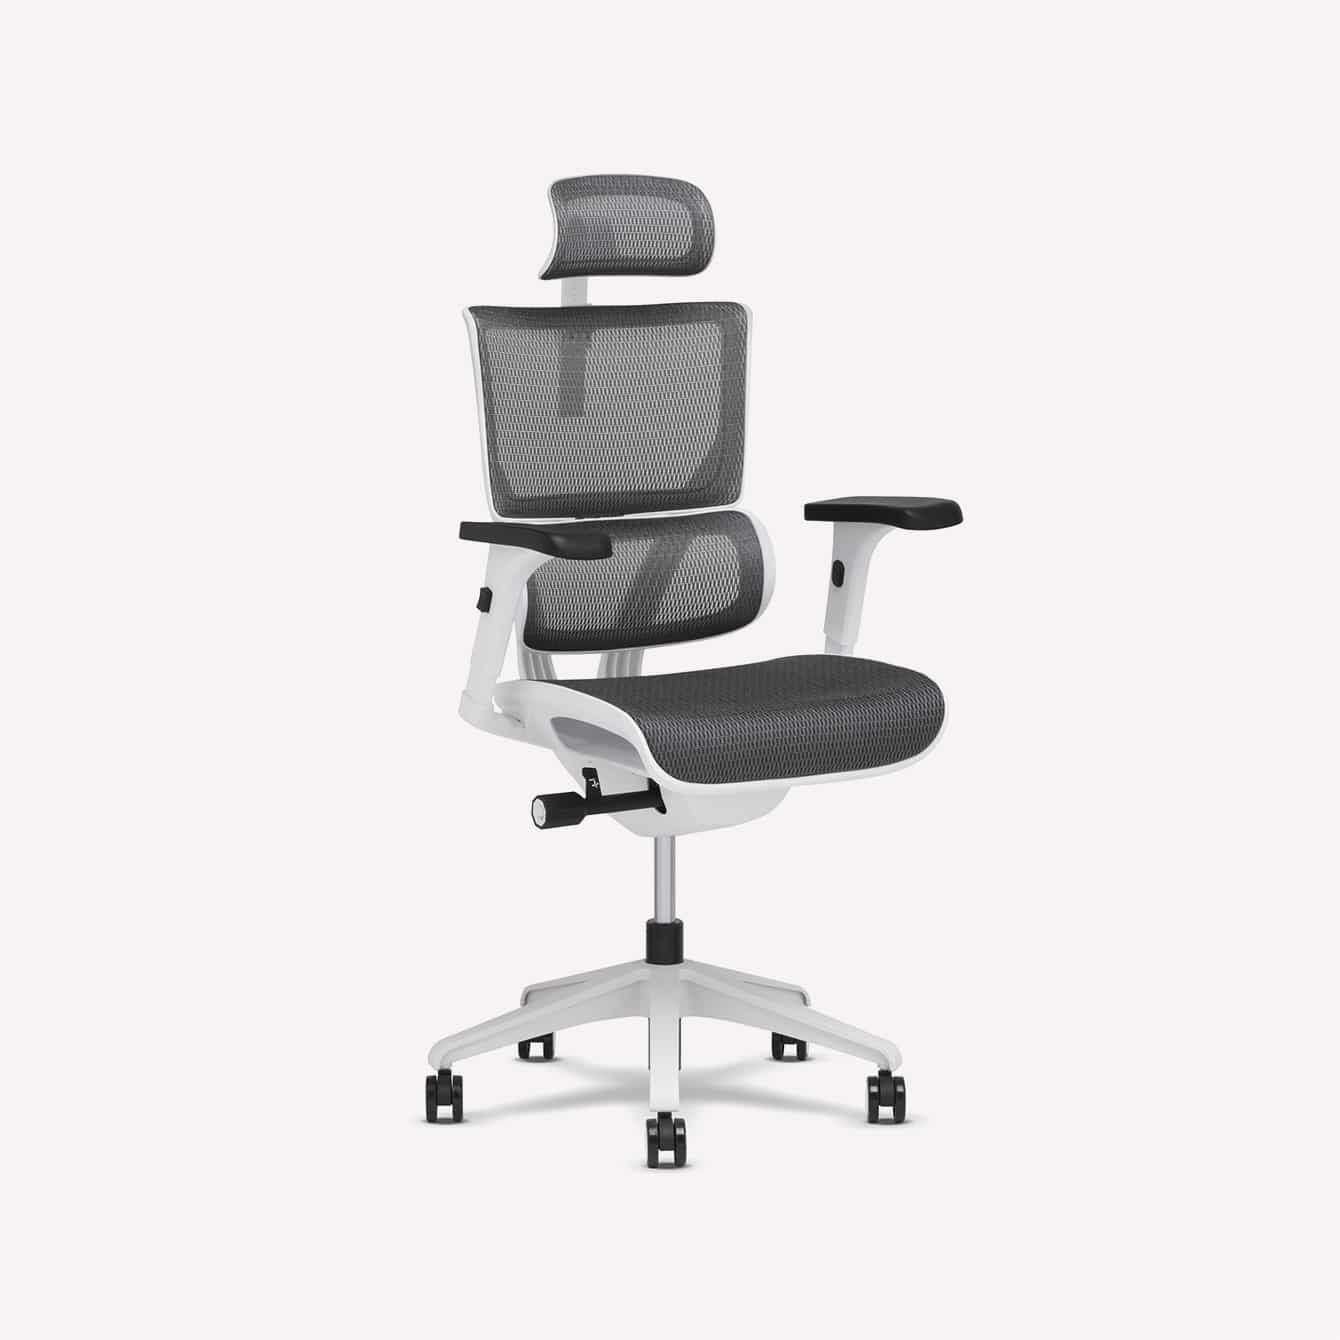 5 Best Small Office Chairs for Short People in 2023